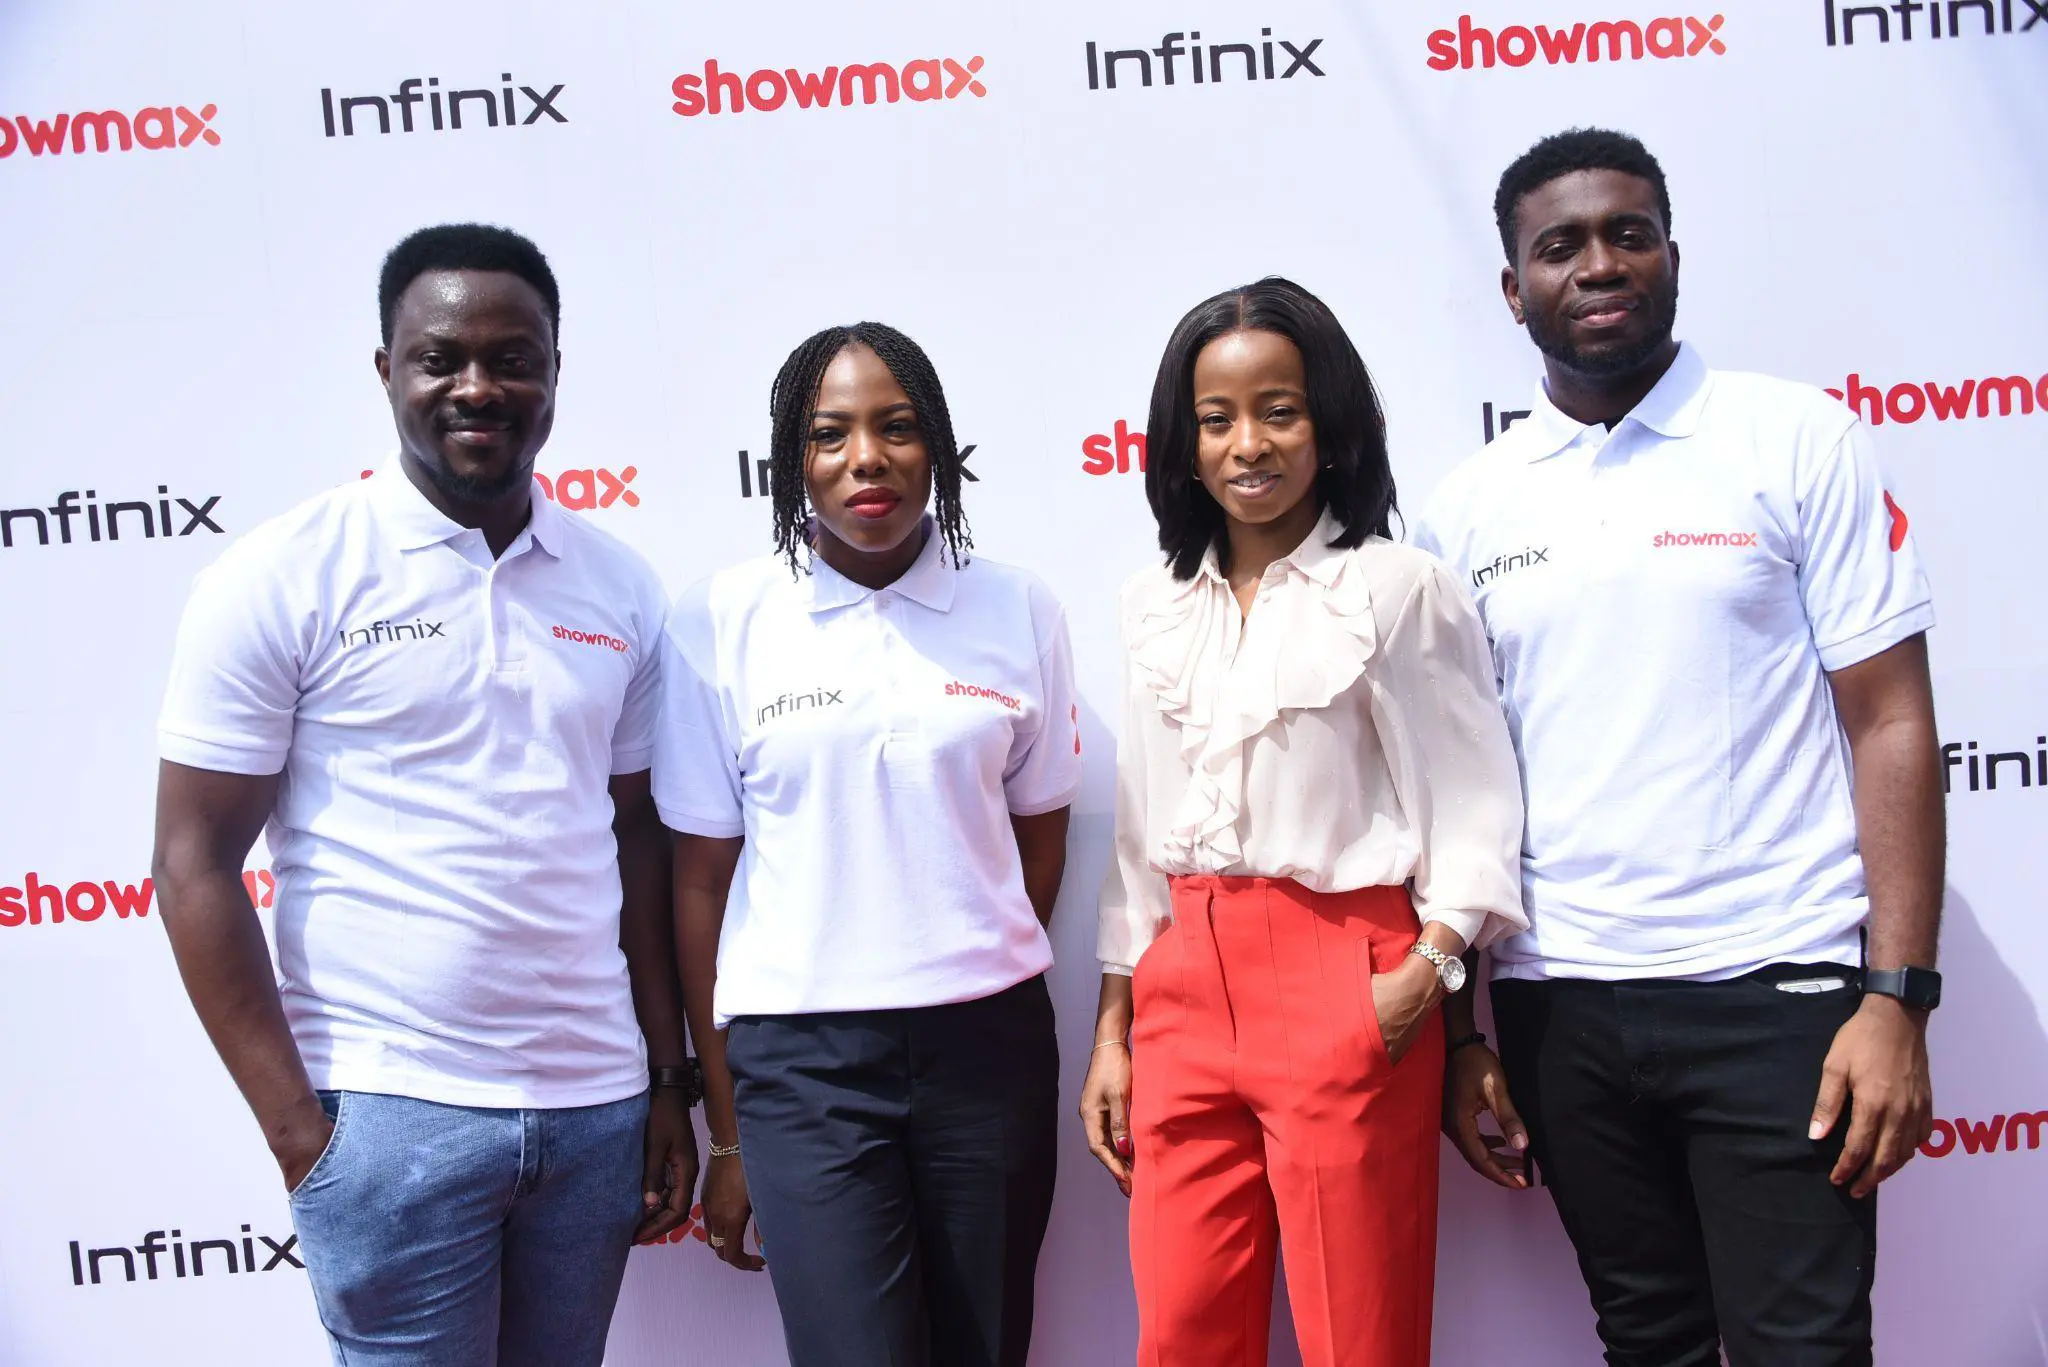 Showmax and Infinix partners to provide customers with an unparalleled viewing experience